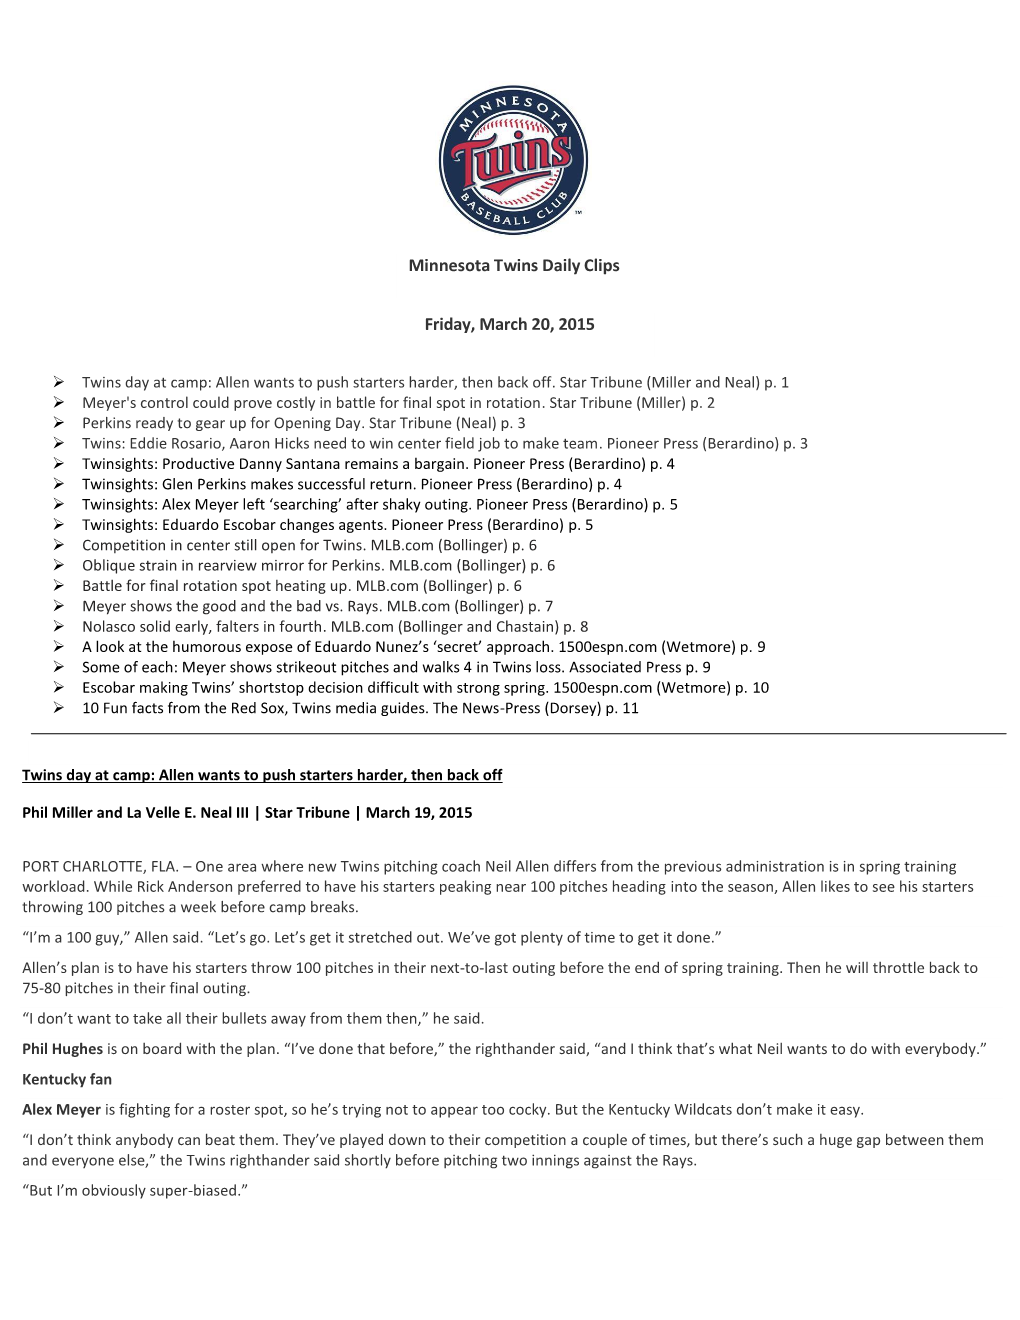 Minnesota Twins Daily Clips Friday, March 20, 2015